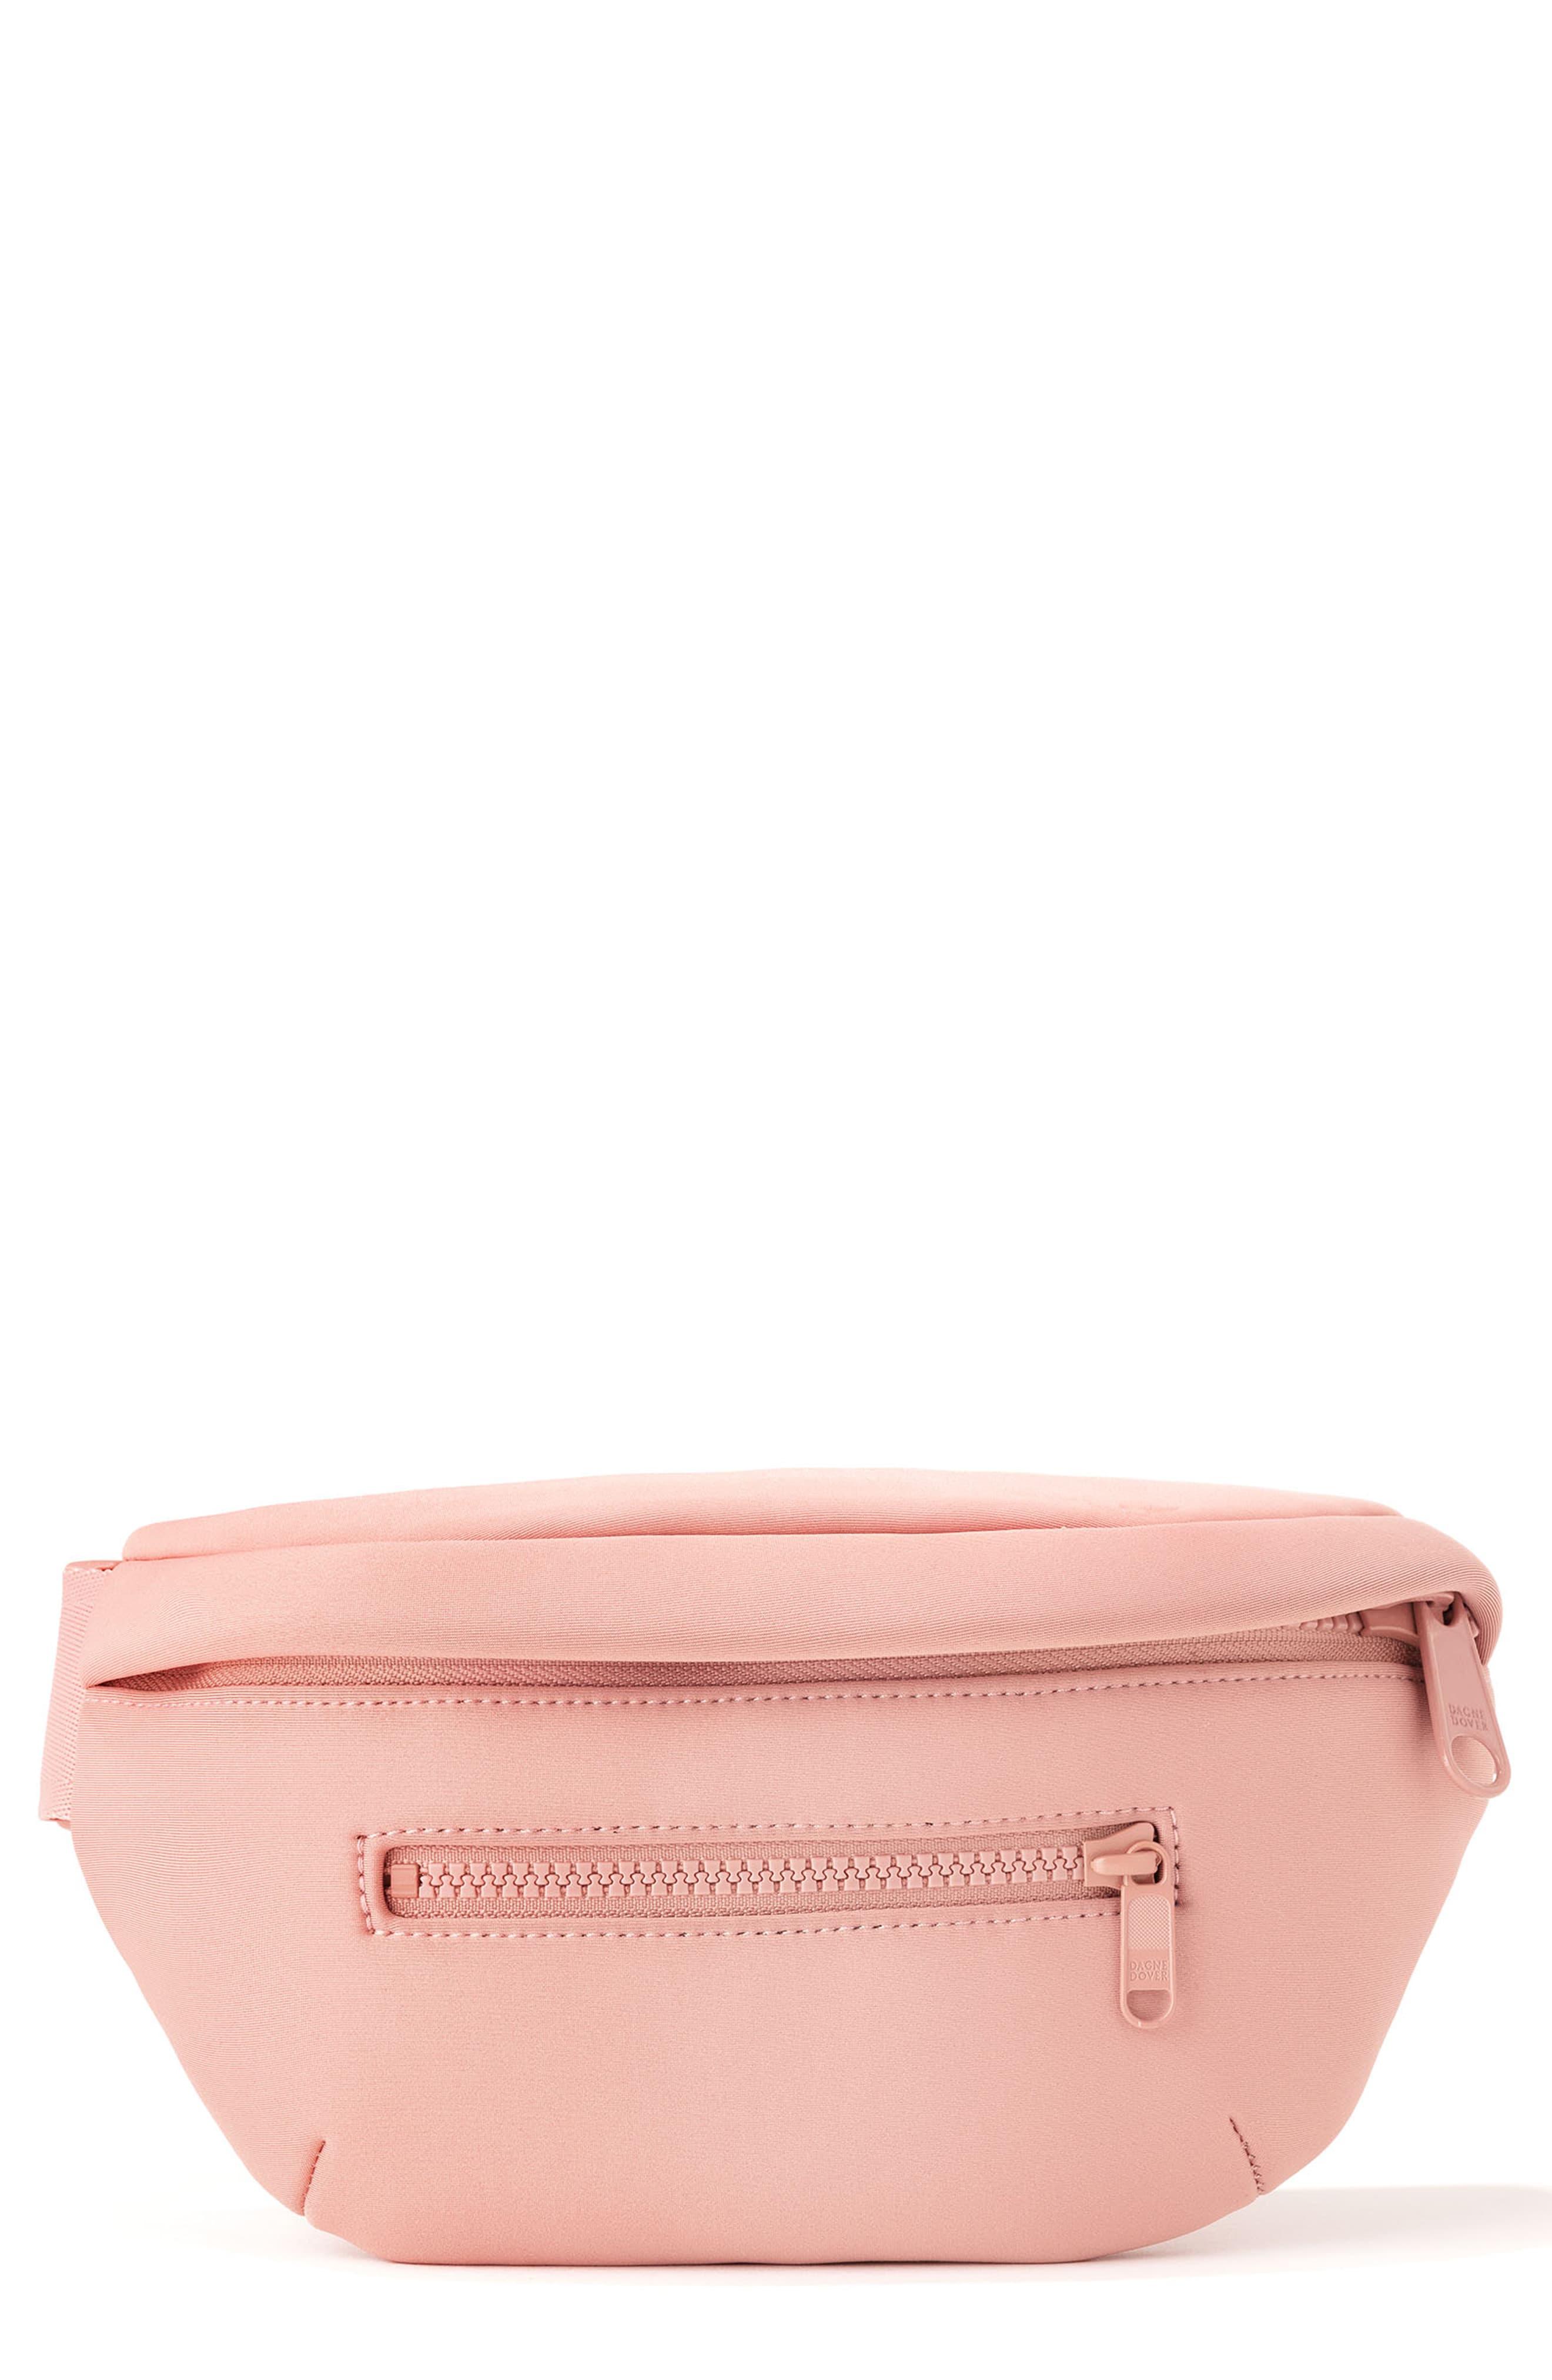 Lyst - Dagne Dover Ace Fanny Pack in Pink